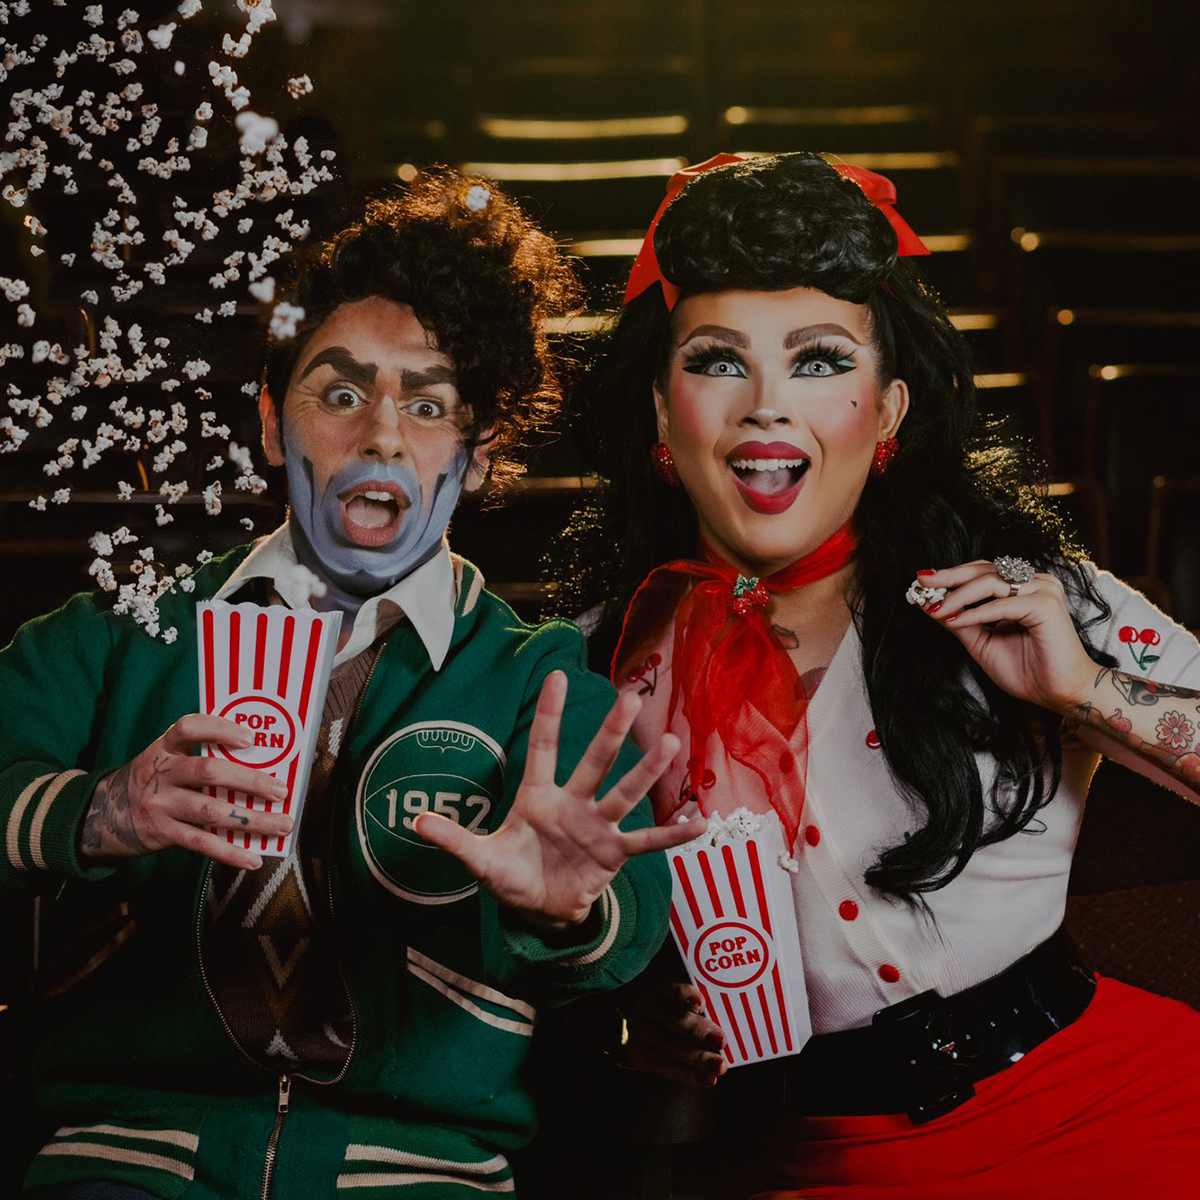 Briar and Rusty in a movie theater holding popcorn, Briar on the right looks engaged and happy, Rusty on the left is surprised as popcorn flys in the air